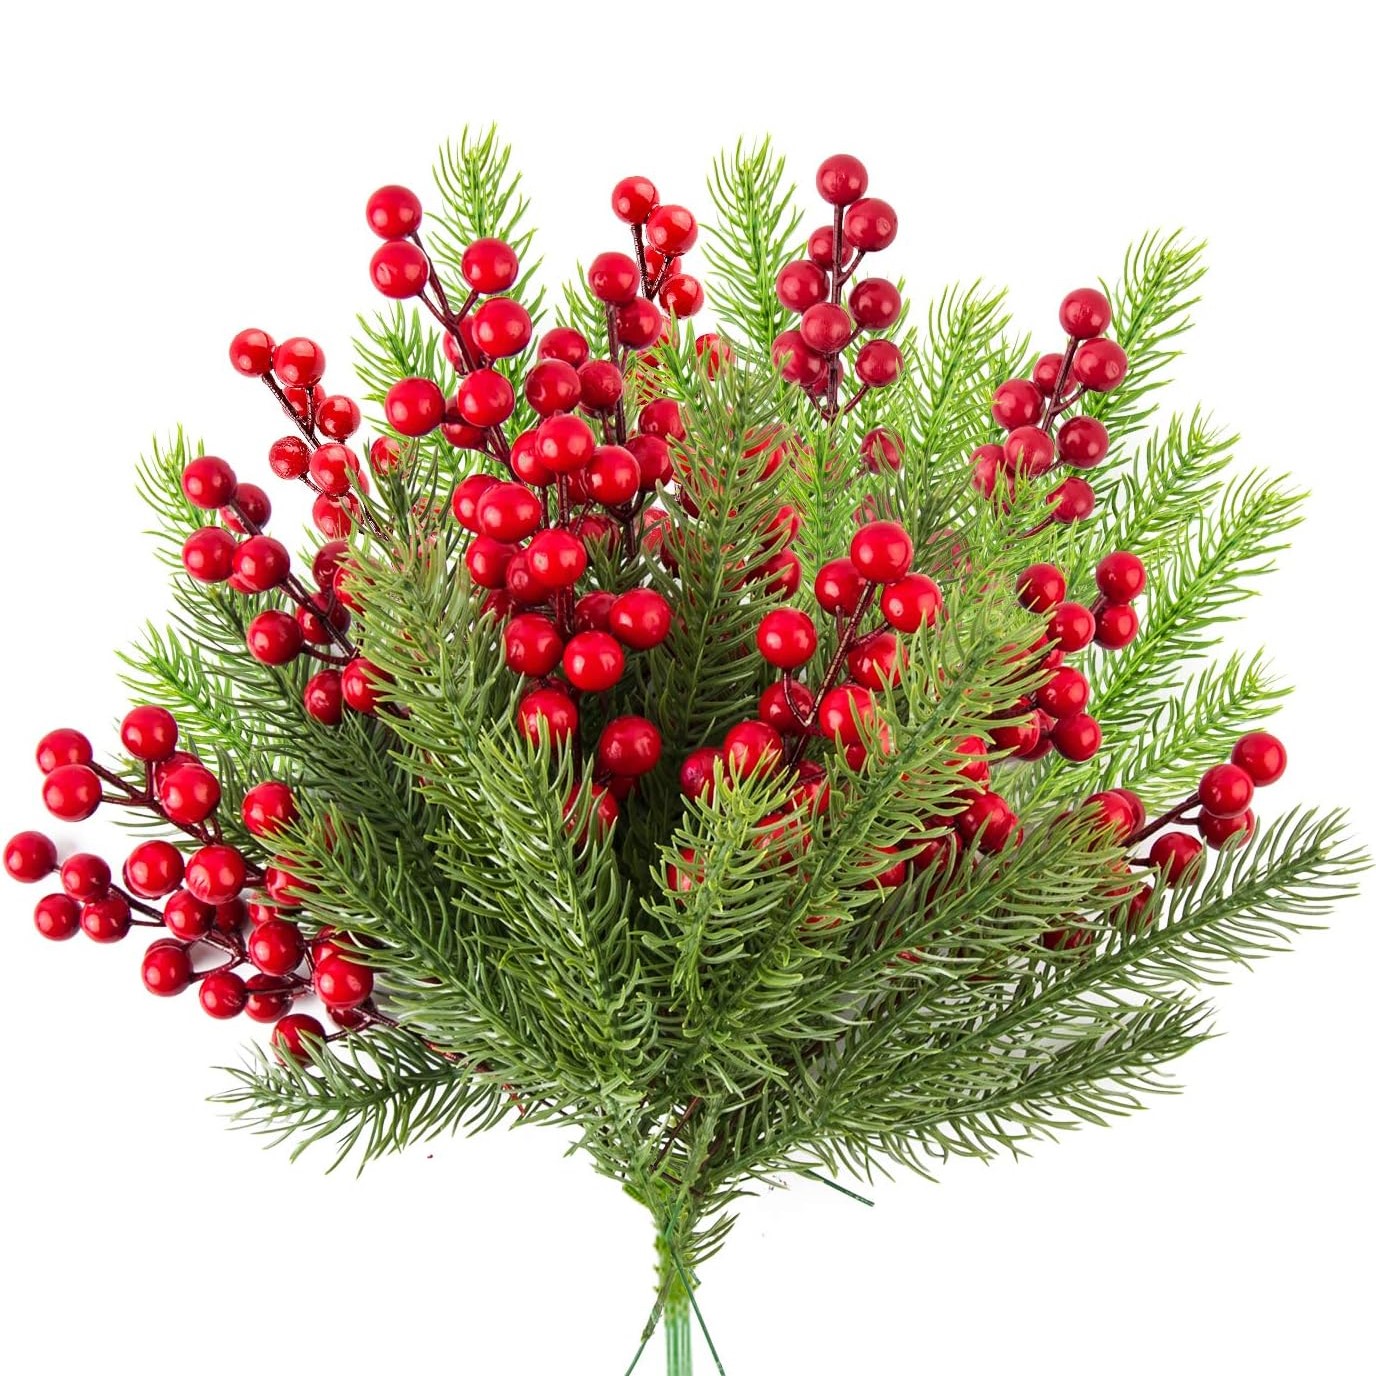 50 X WIRED Stems Artificial Christmas Holly Berries Christmas Wreath Making  £3.49 - PicClick UK